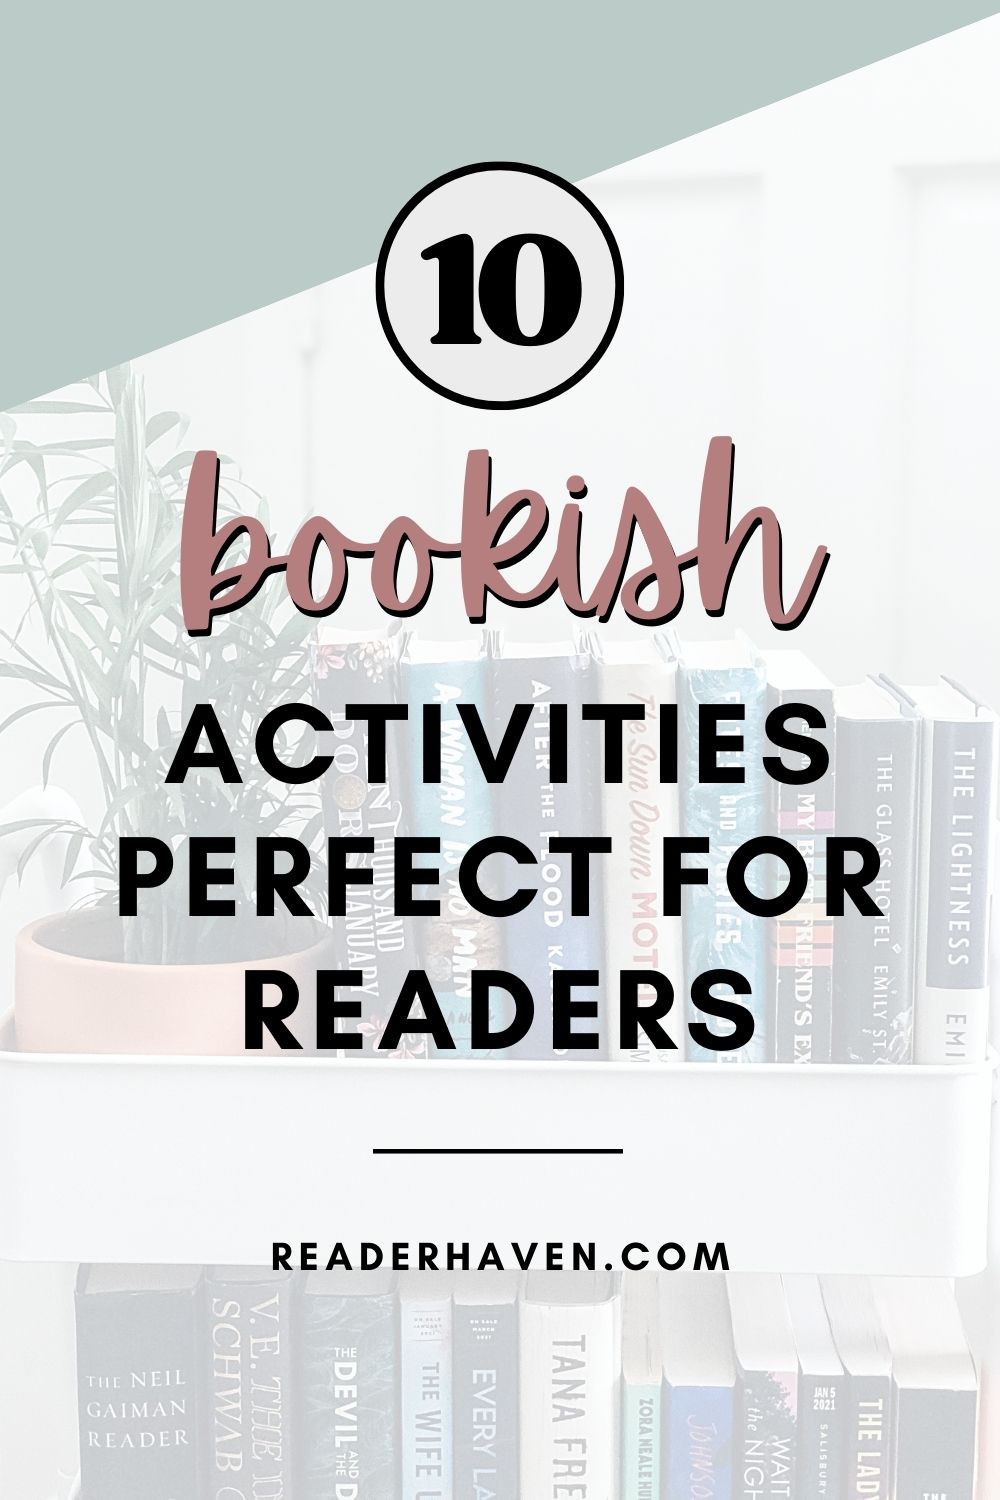 10 bookish activities for readers